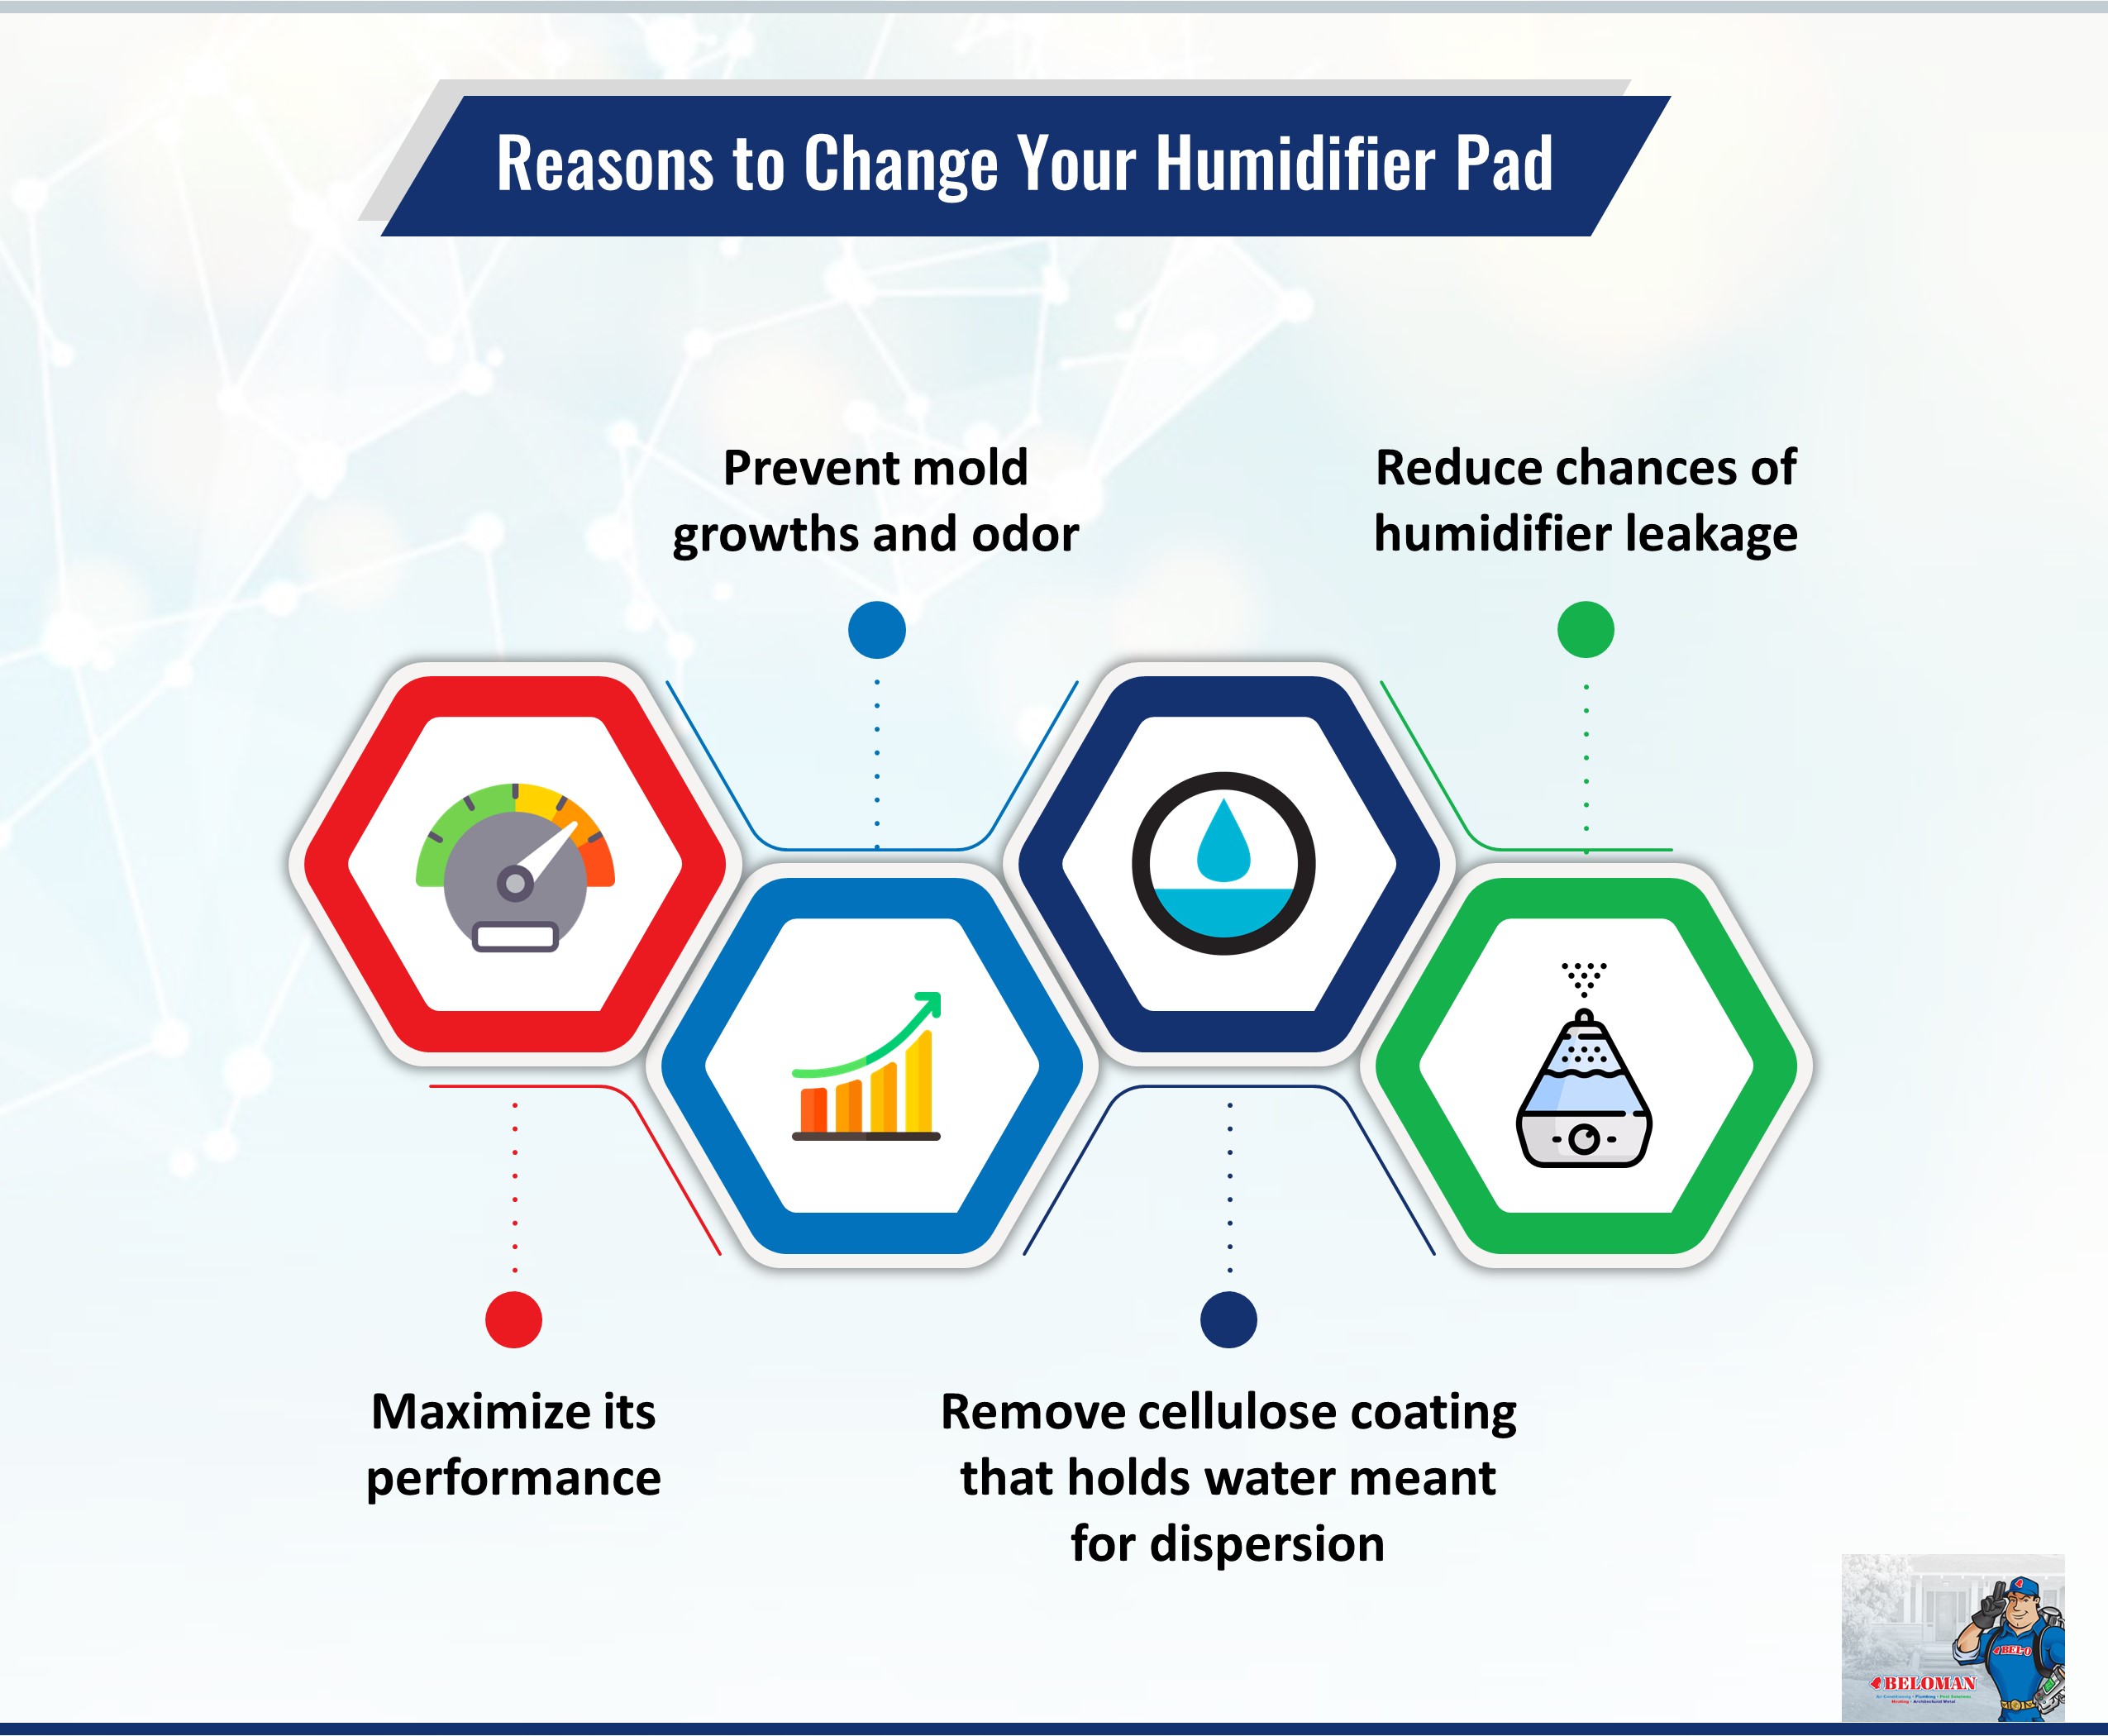 Reasons to Change Your Humidifier Pad